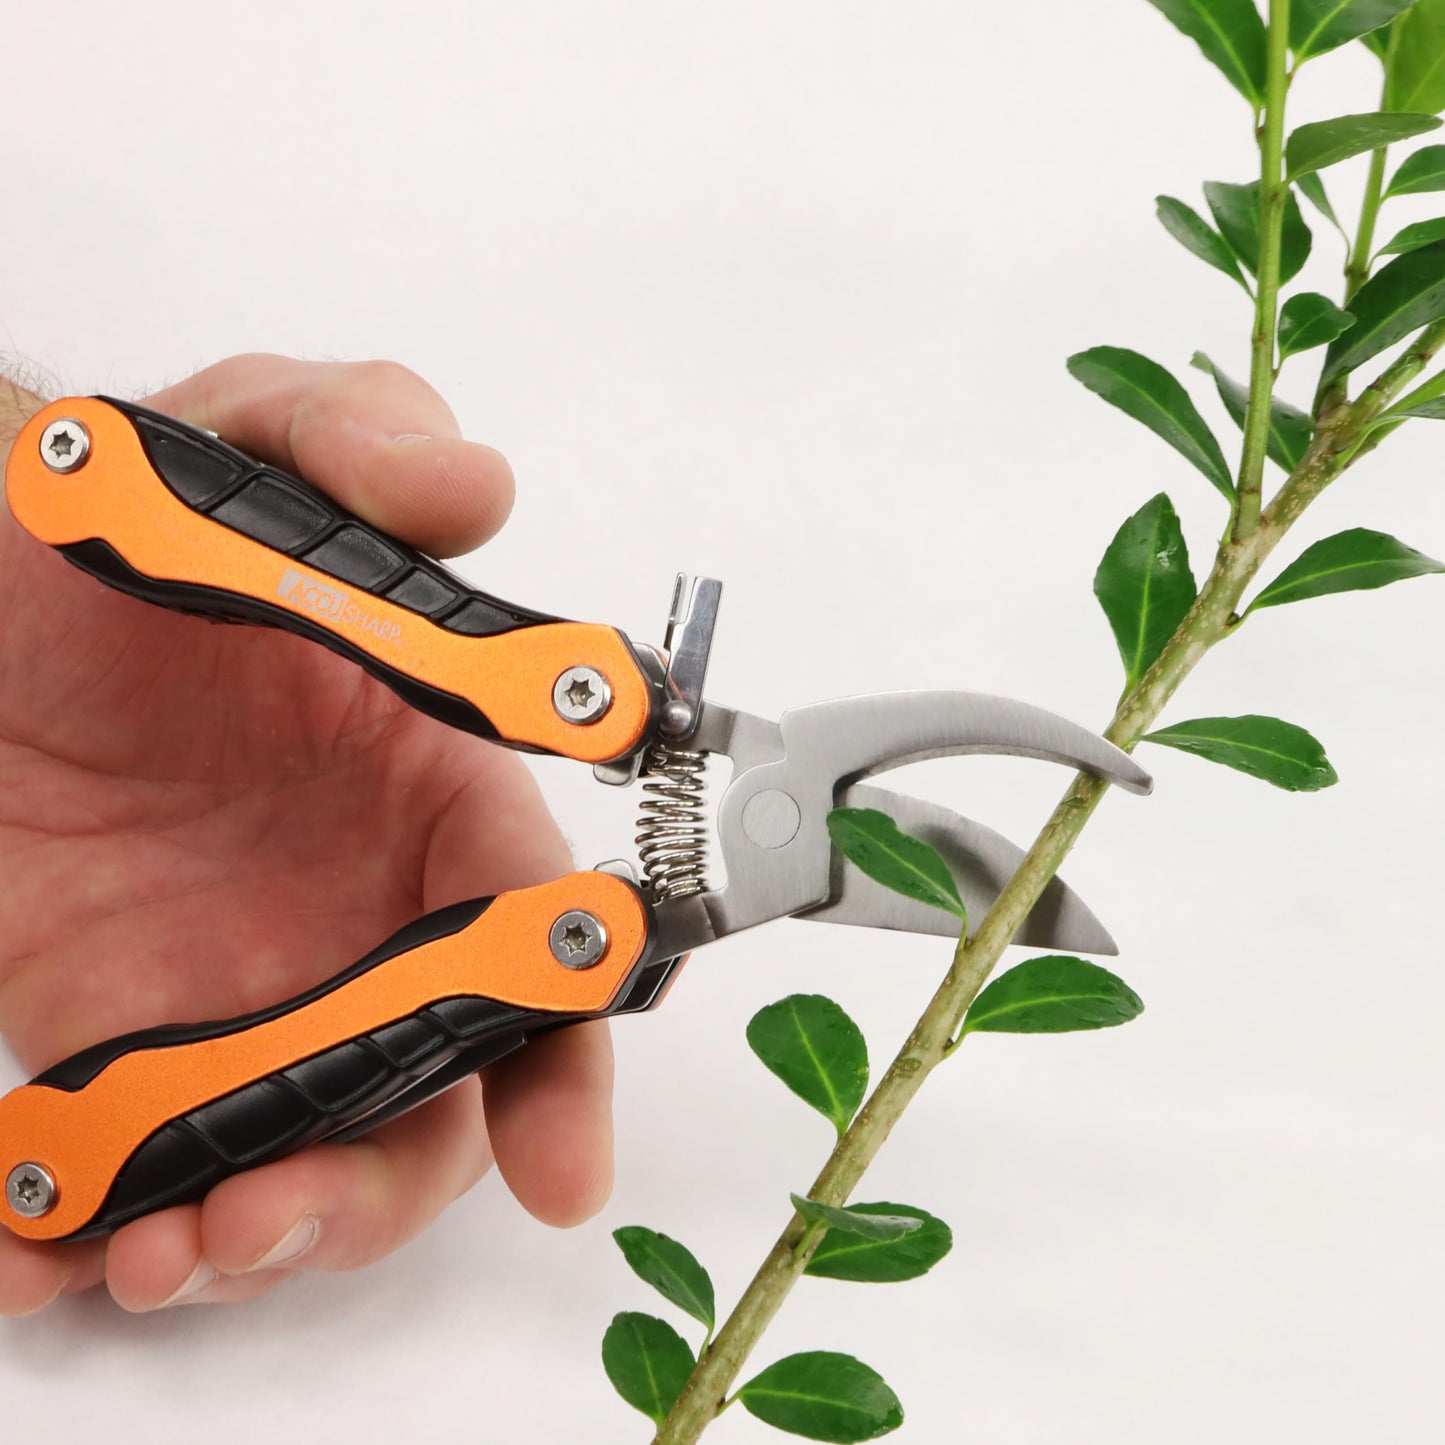 AccuSharp Sportsman's Multi-Tool with Pruner/Game Clippers and Multitool, Hunting Tools, Camping, Hiking, Fishing, Outdoor